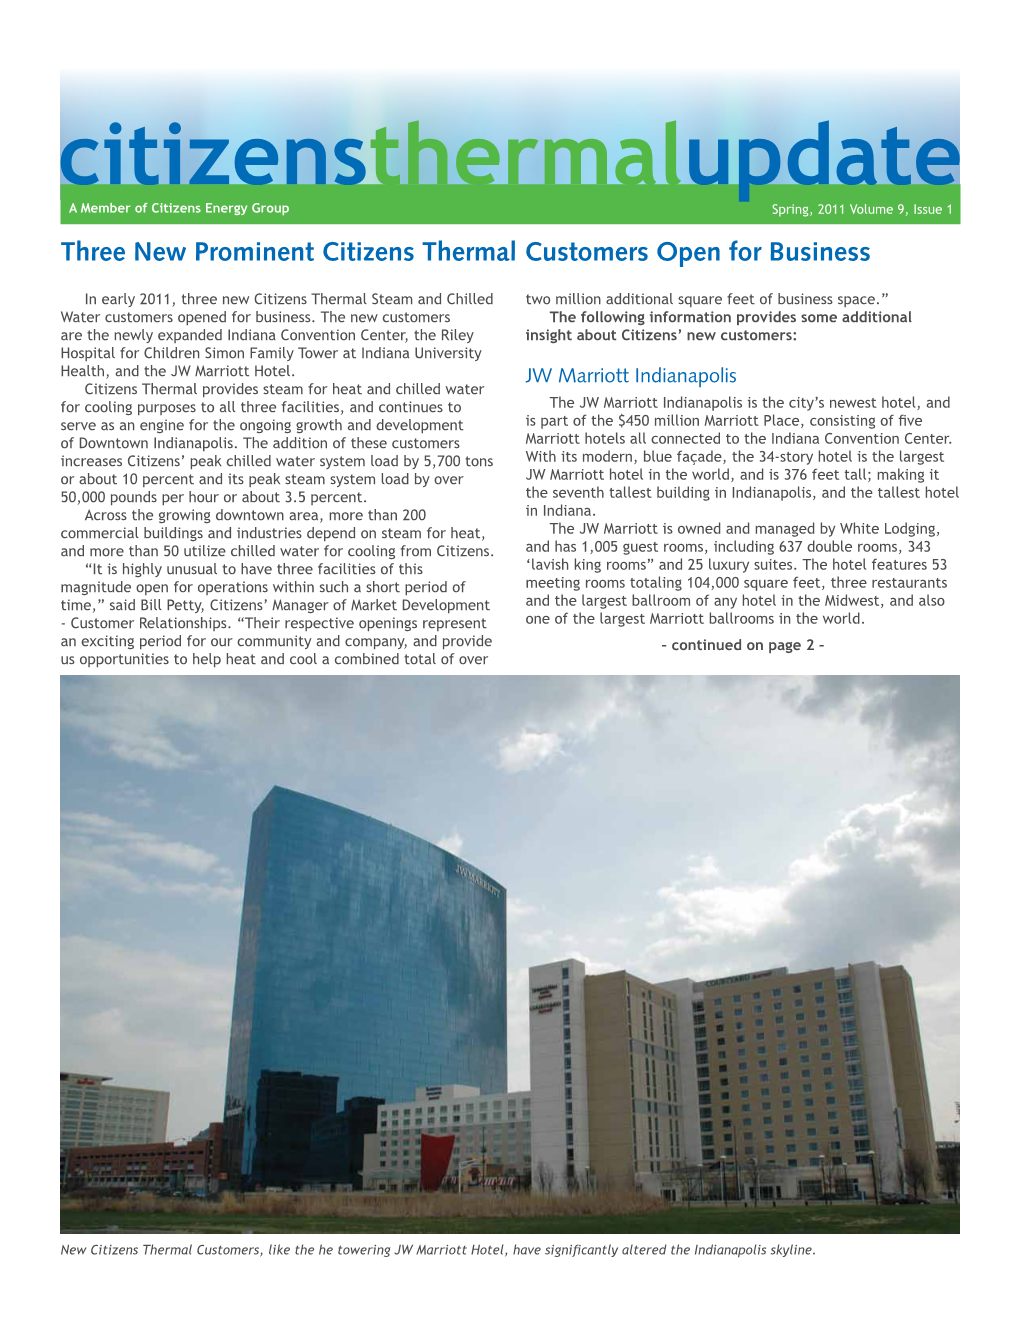 Citizensthermalupdate a Member of Citizens Energy Group Spring, 2011 Volume 9, Issue 1 Three New Prominent Citizens Thermal Customers Open for Business